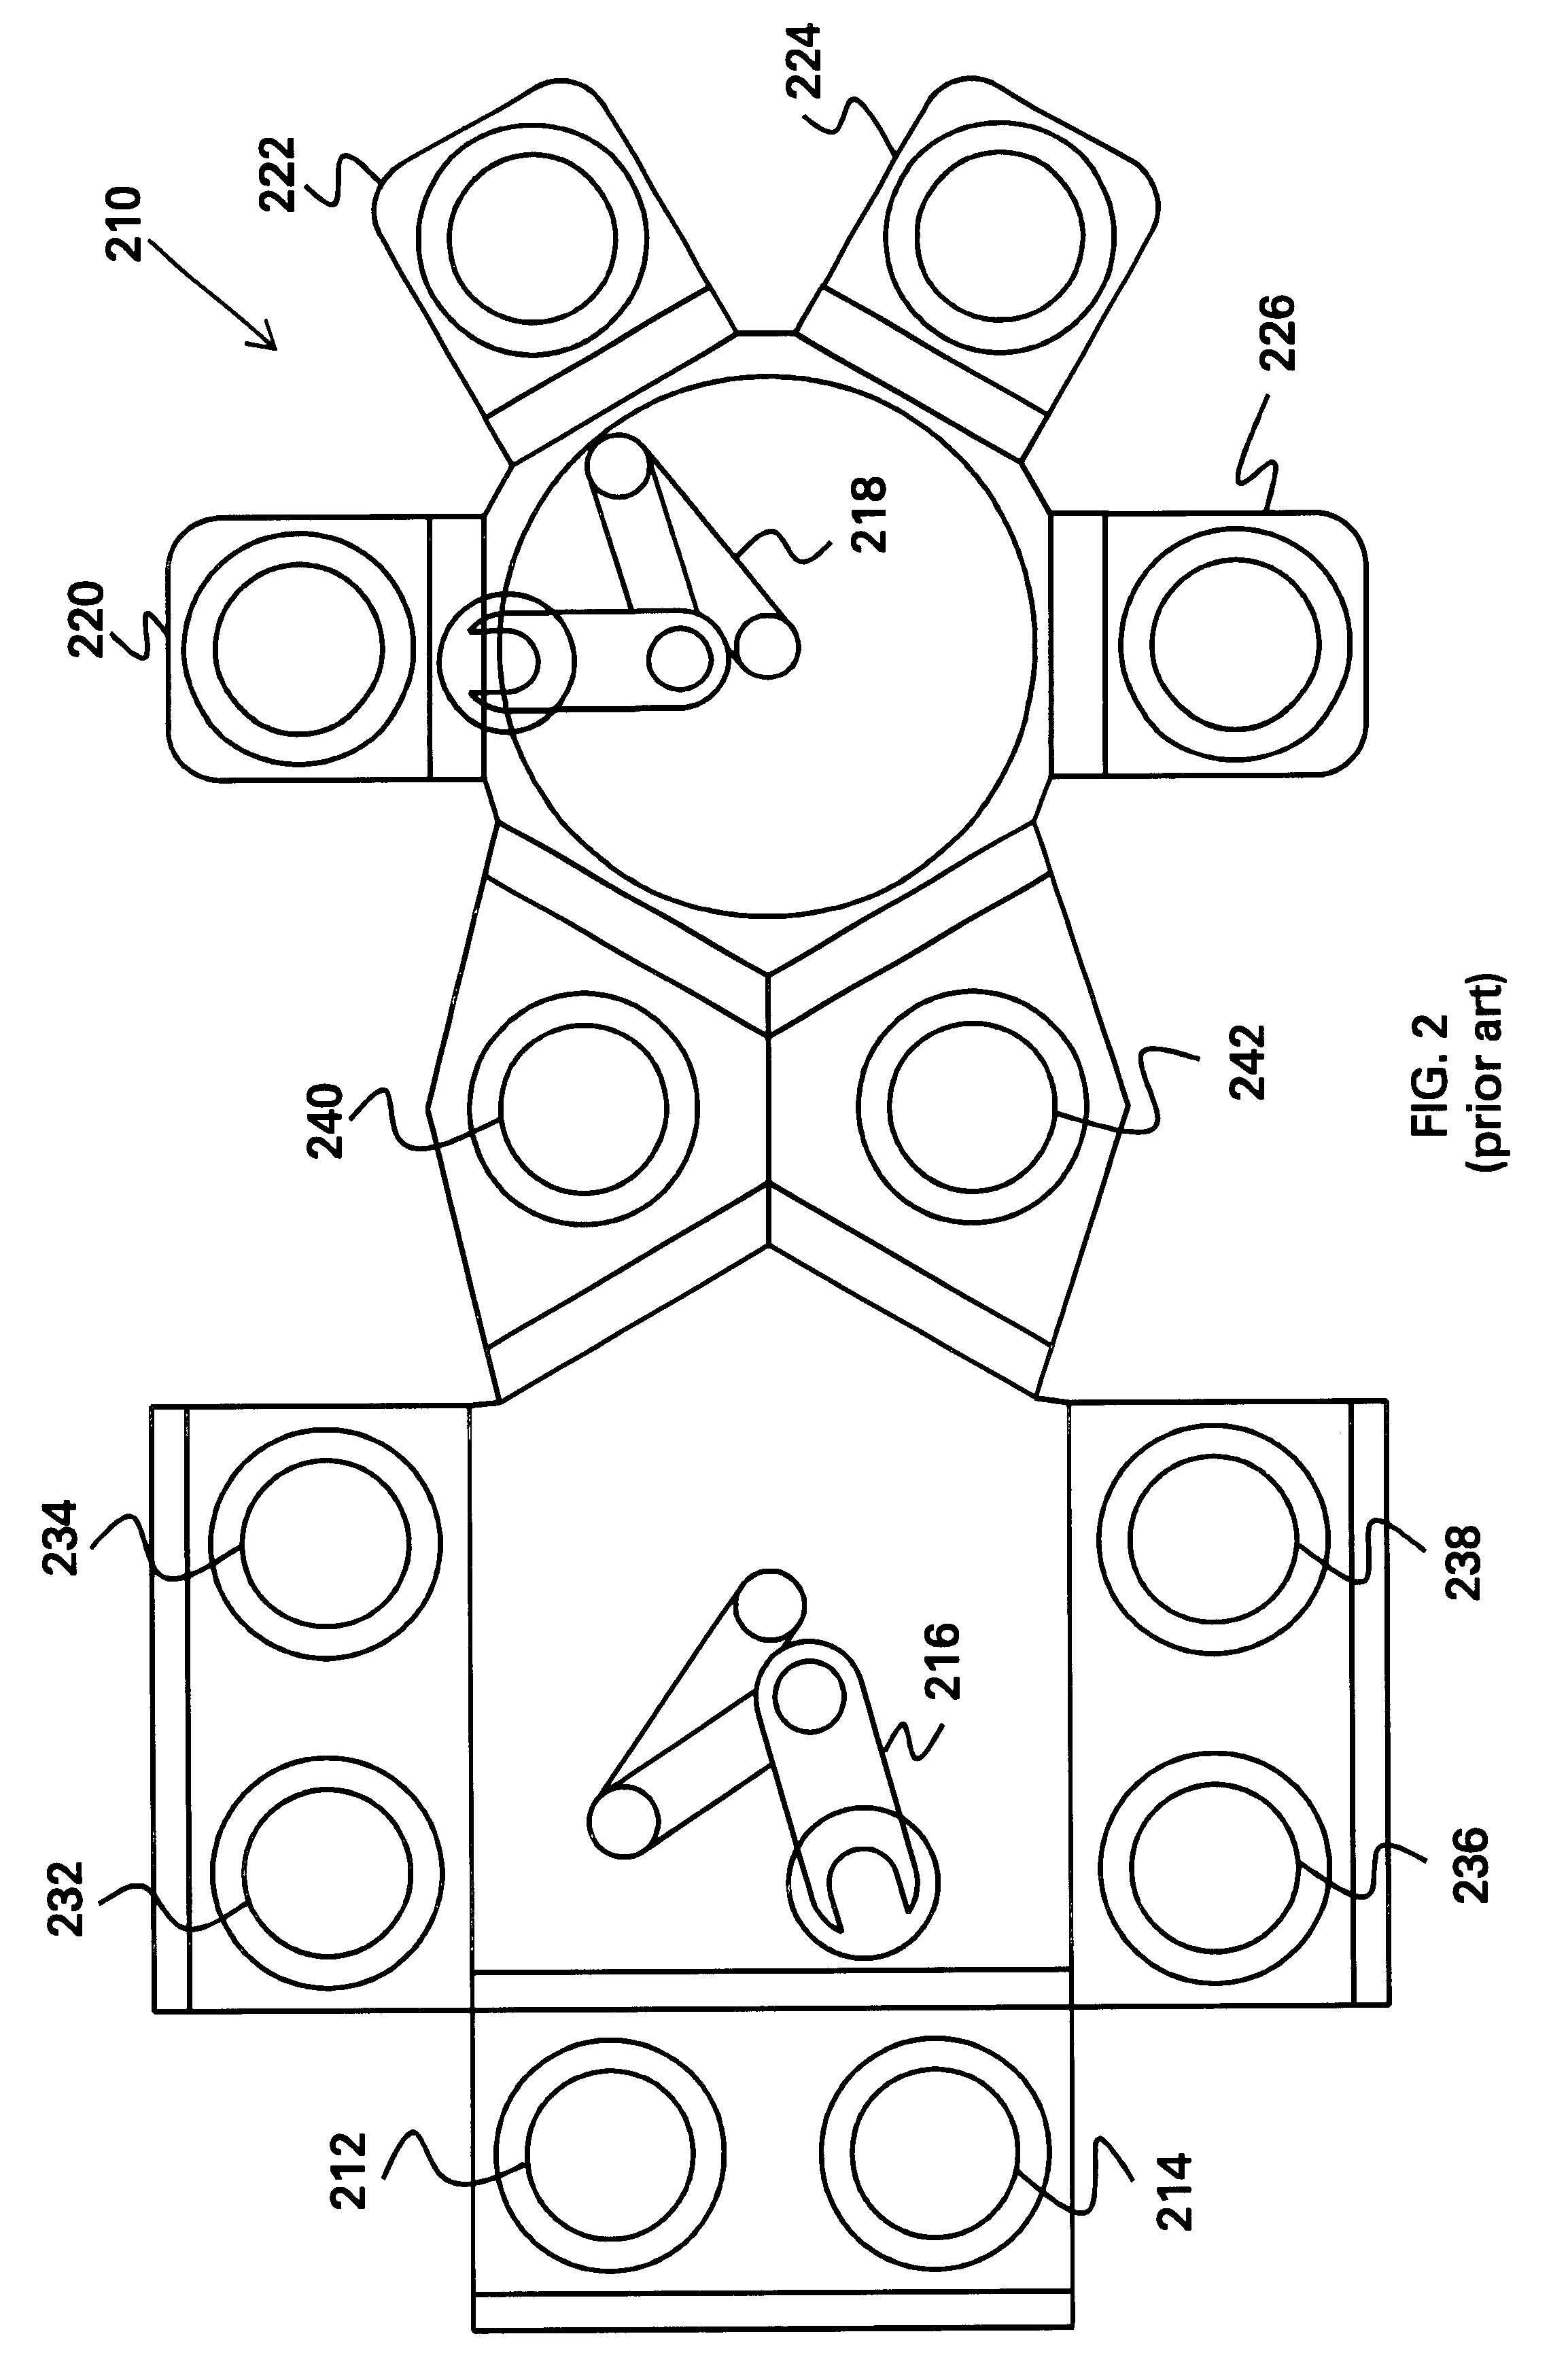 Cluster tool architecture for sulfur trioxide processing